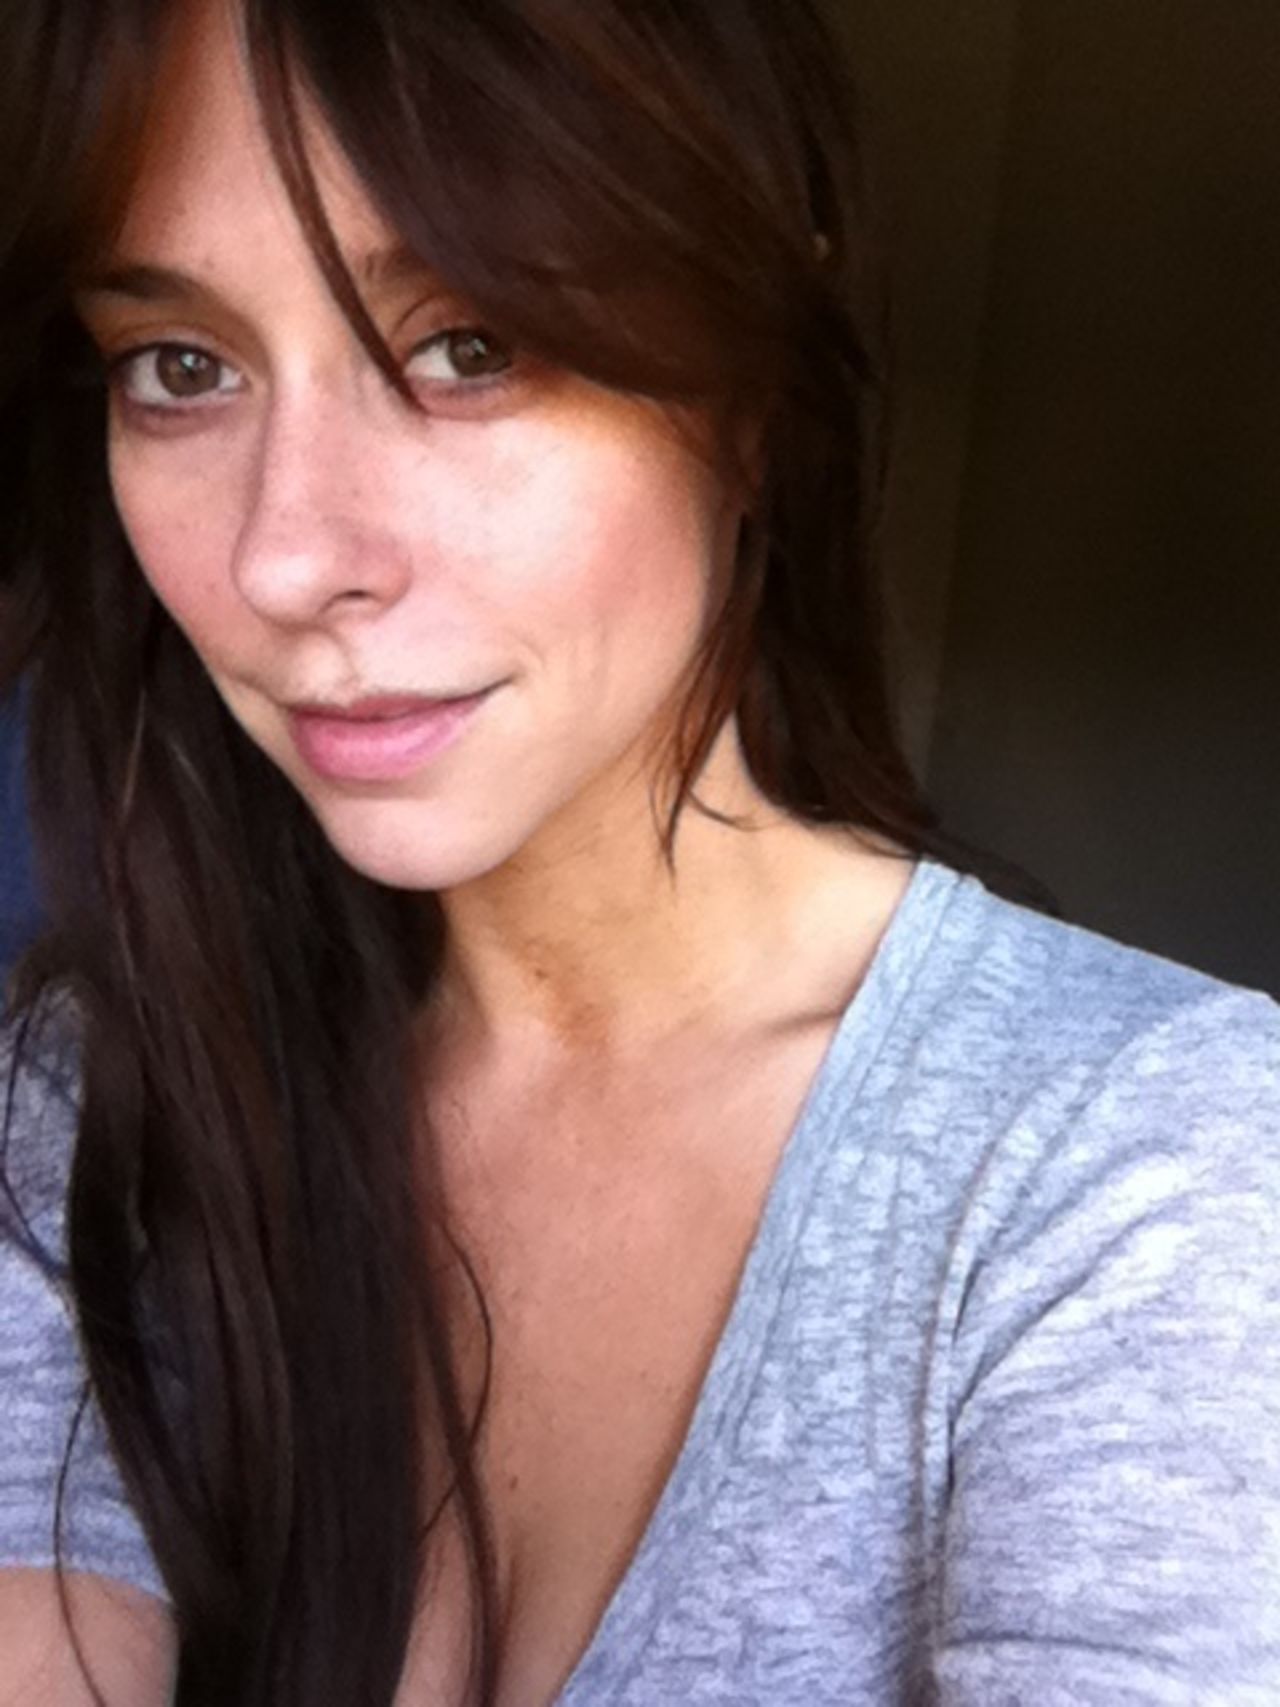 Jennifer Love Hewitt posted this photo of herself makeup-free with the tweet "No make up pic for my lovelys!" Her fan Leonardo Milevich posted a response: "This only prove[s] the kind of great woman you are. Hugs for you." 